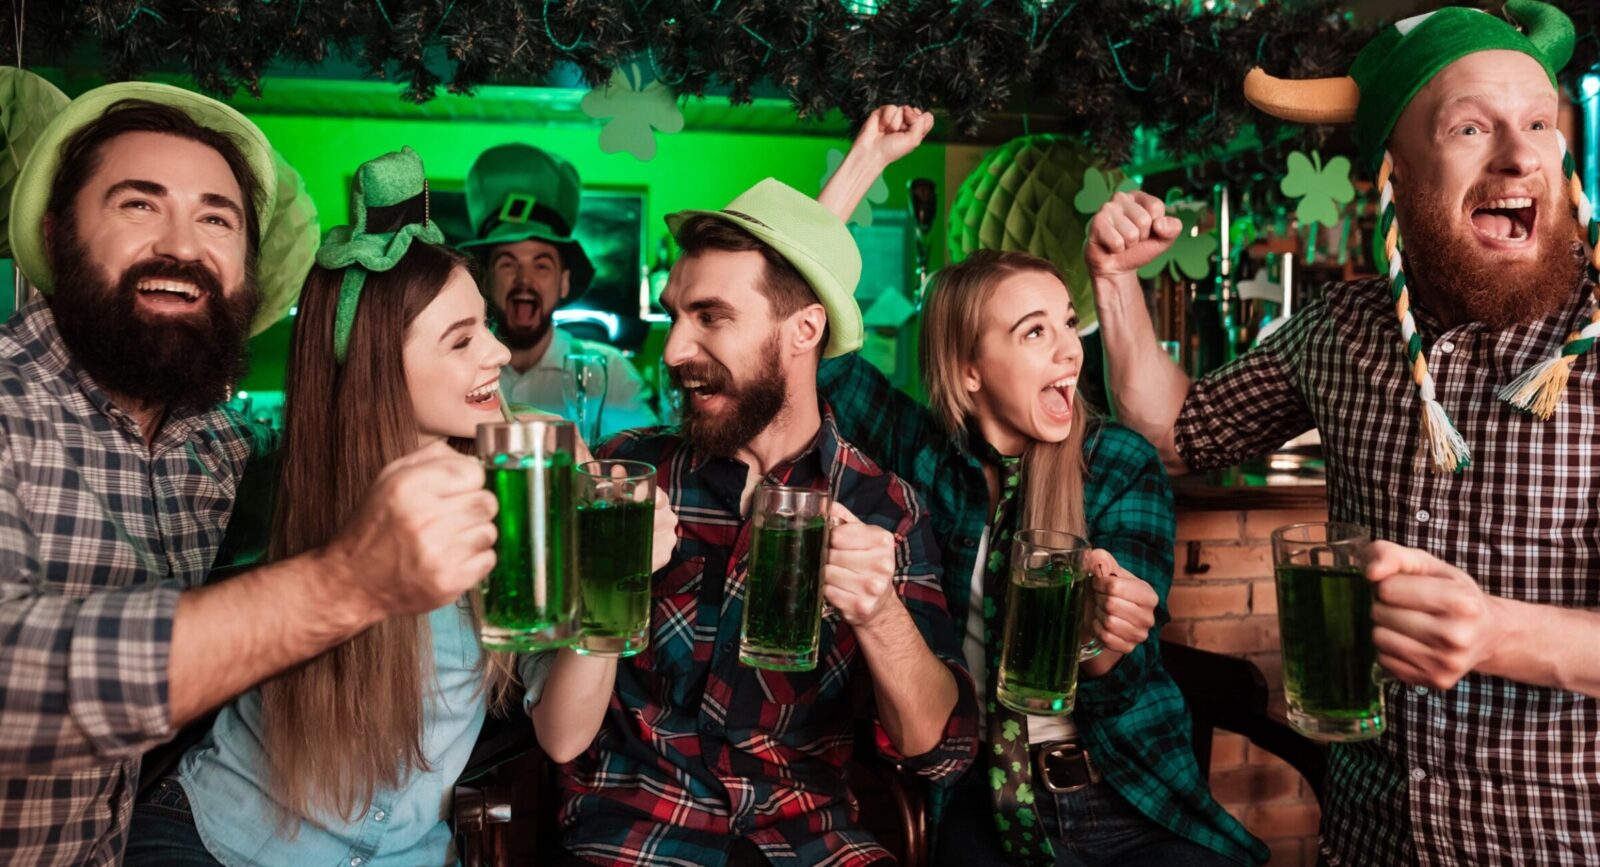 Get Tickets to the Almost St. Patrick’s Day Pub Crawl!